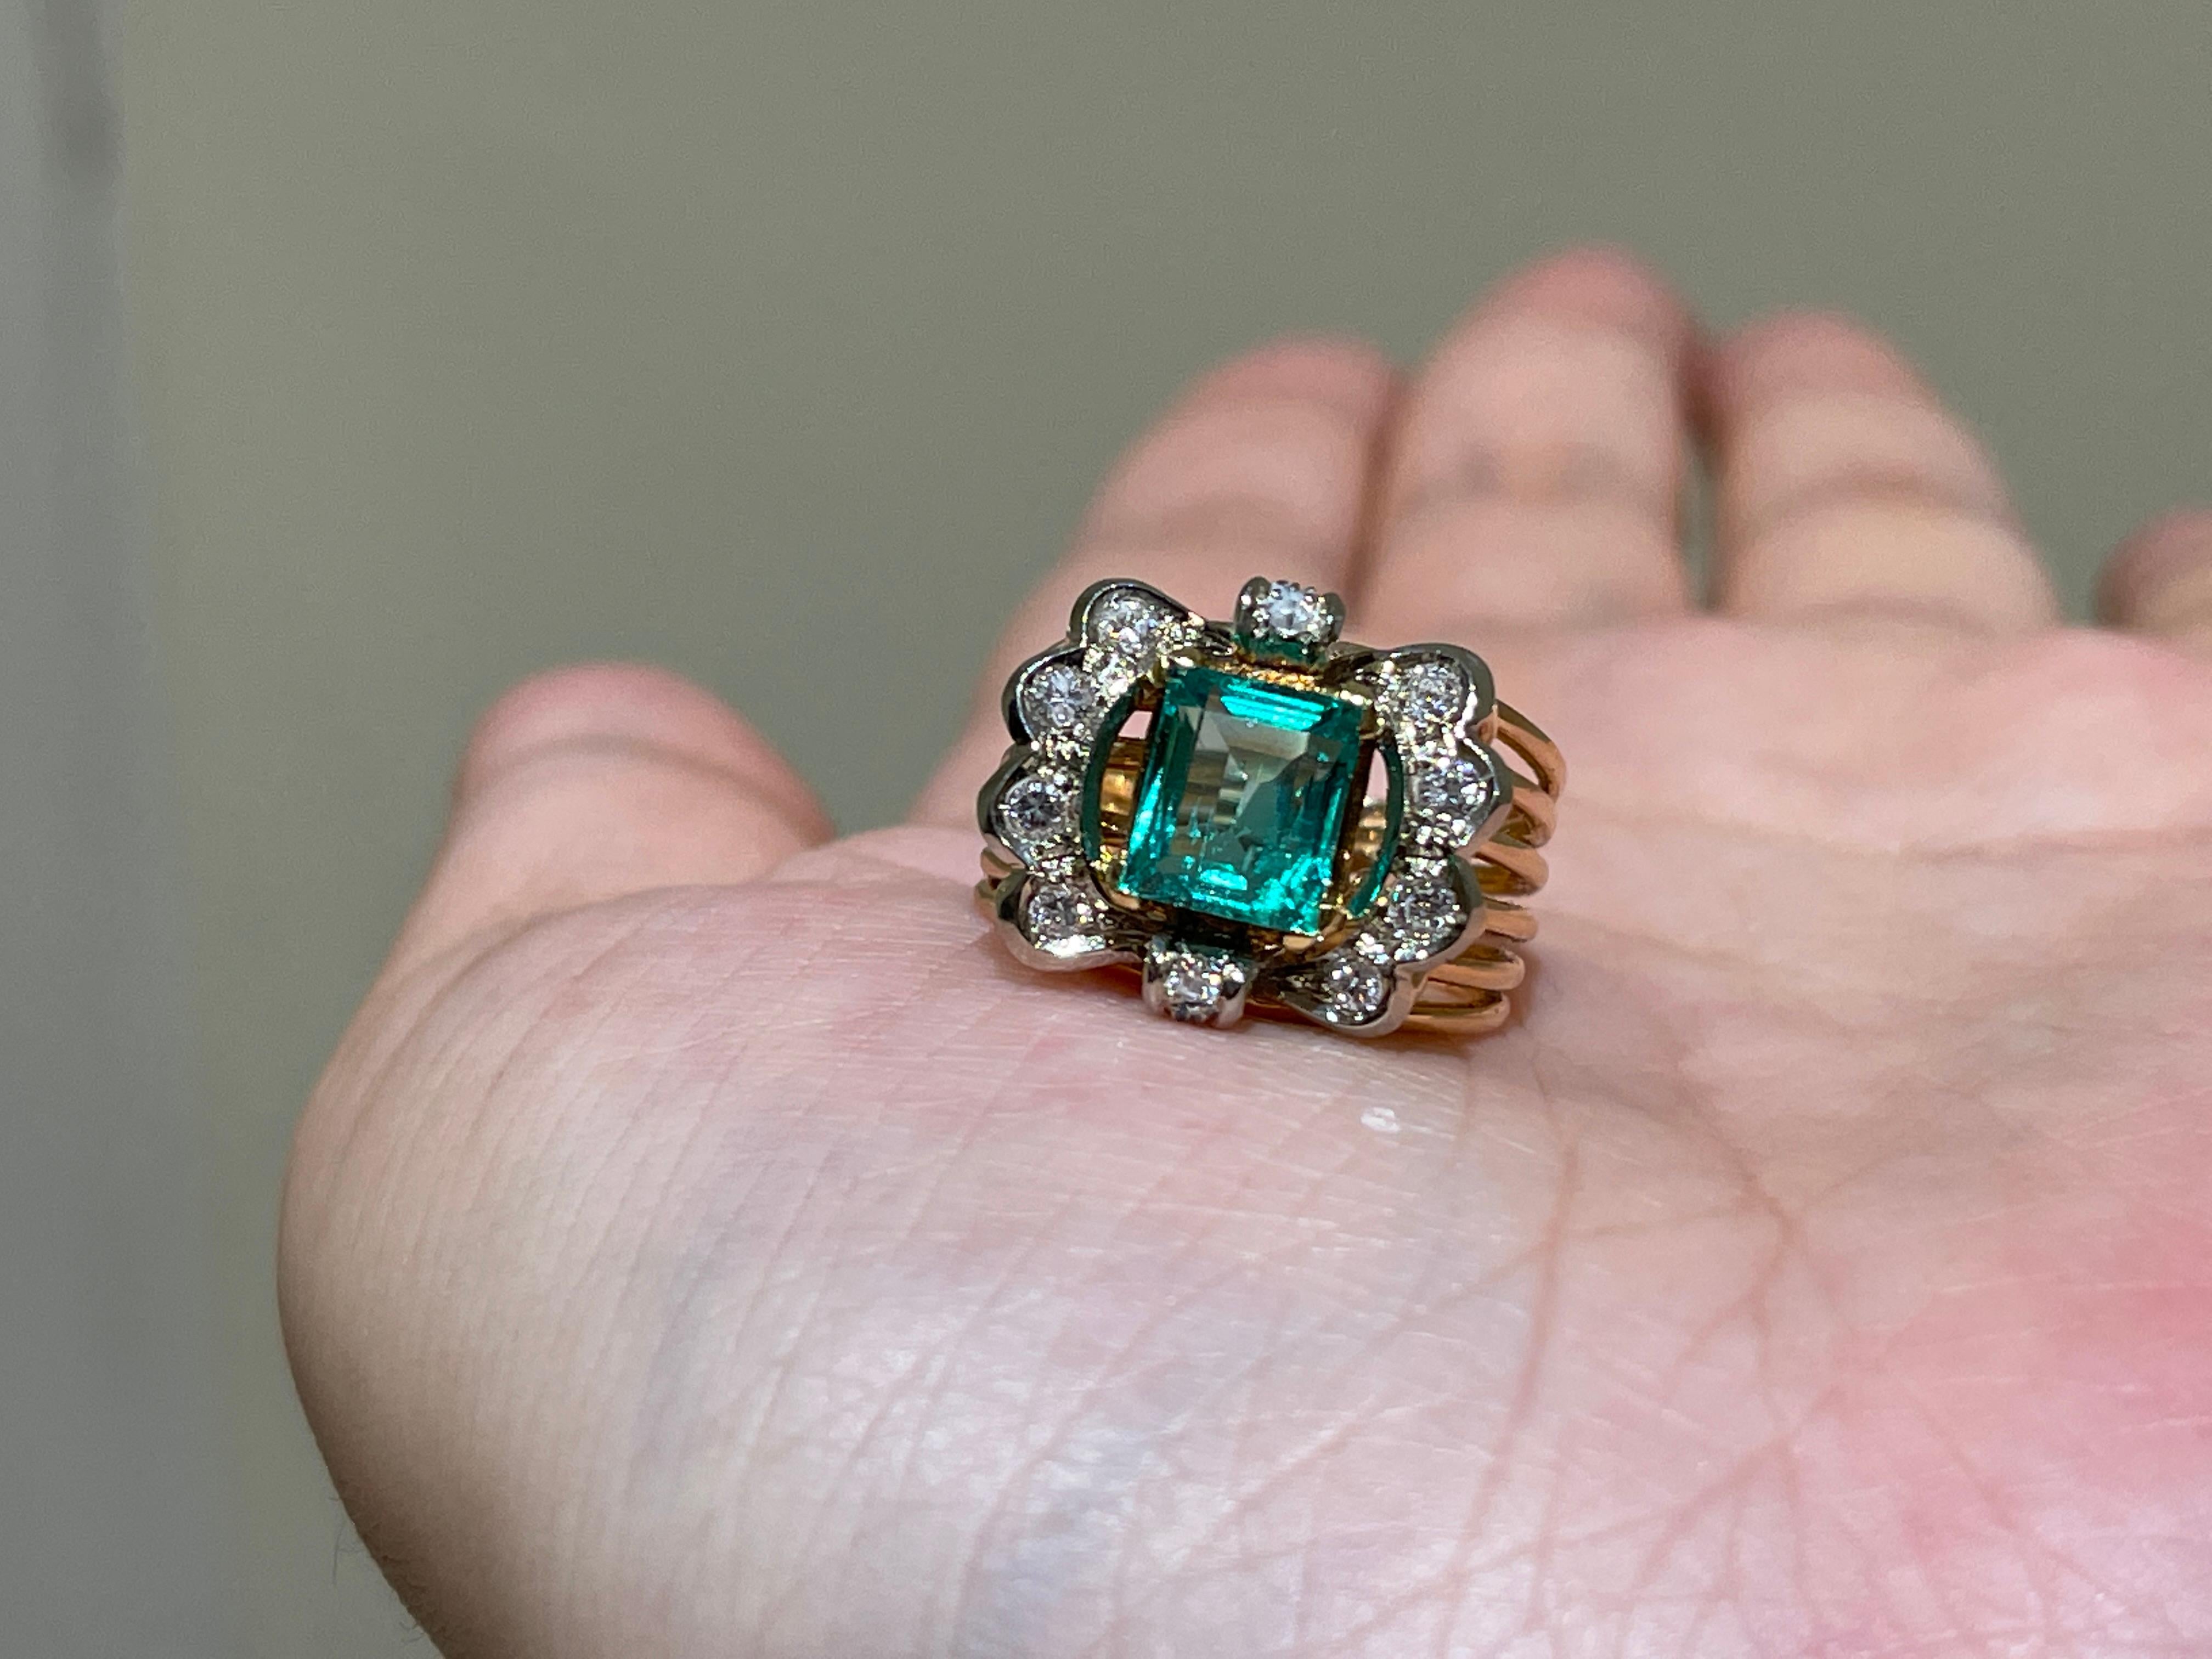 Date	                                2013
Retail Price	                        £3650 / $4800 / €4250
Emerald                                  1.5ct Columbia, with moderate clarity /6.3 mm x 7.55mm x 4.5mm
Diamond                                